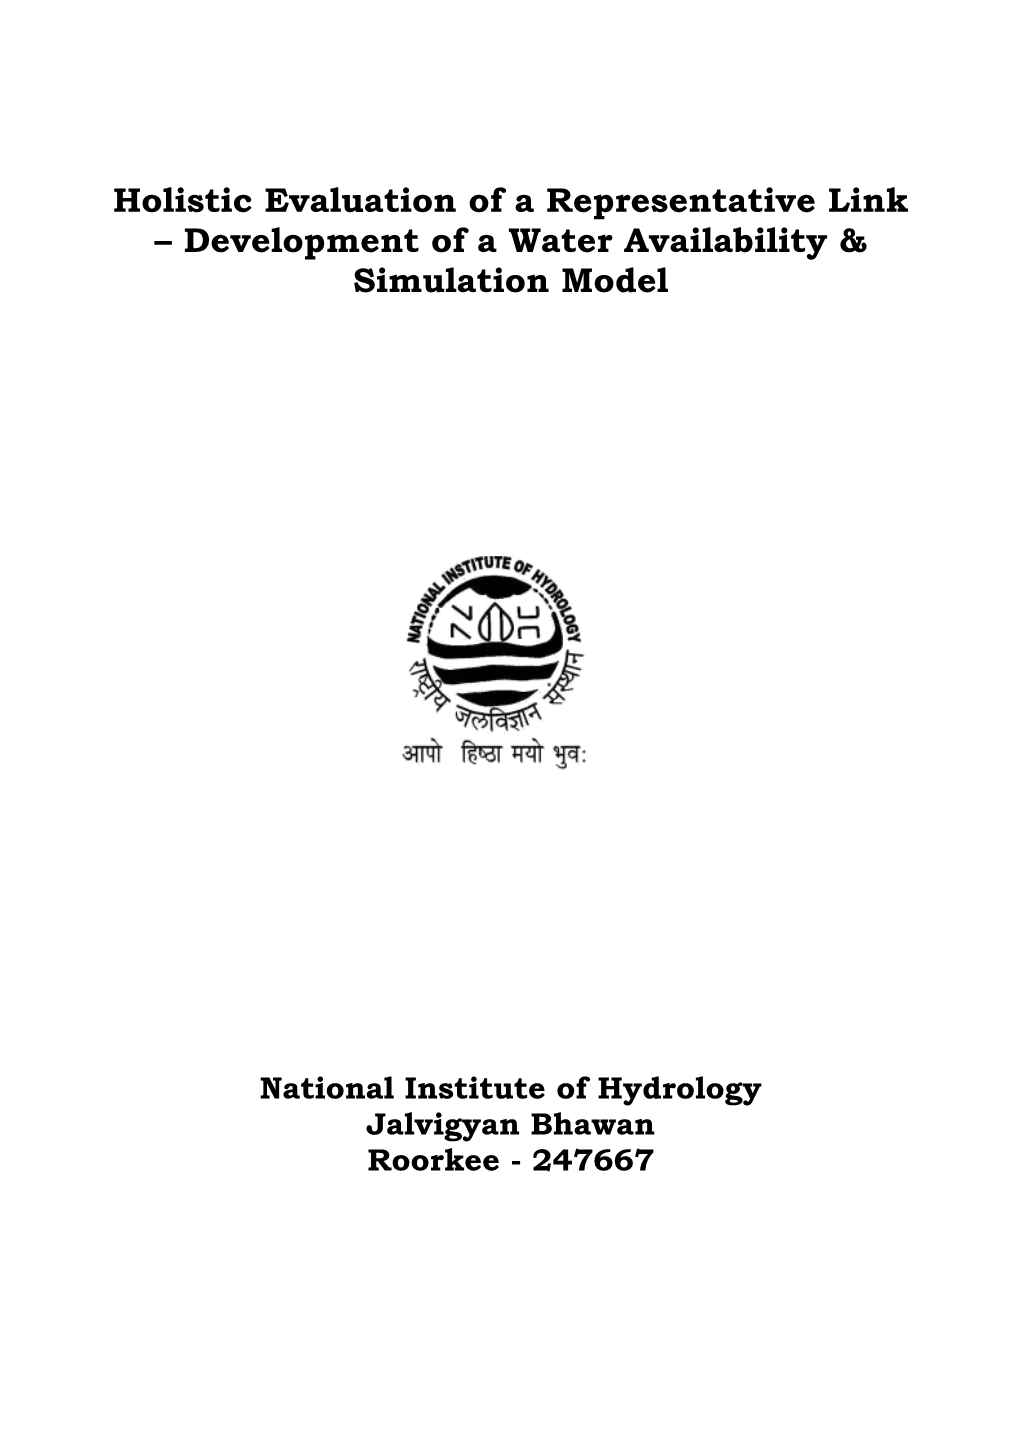 Development of a Water Availability & Simulation Model